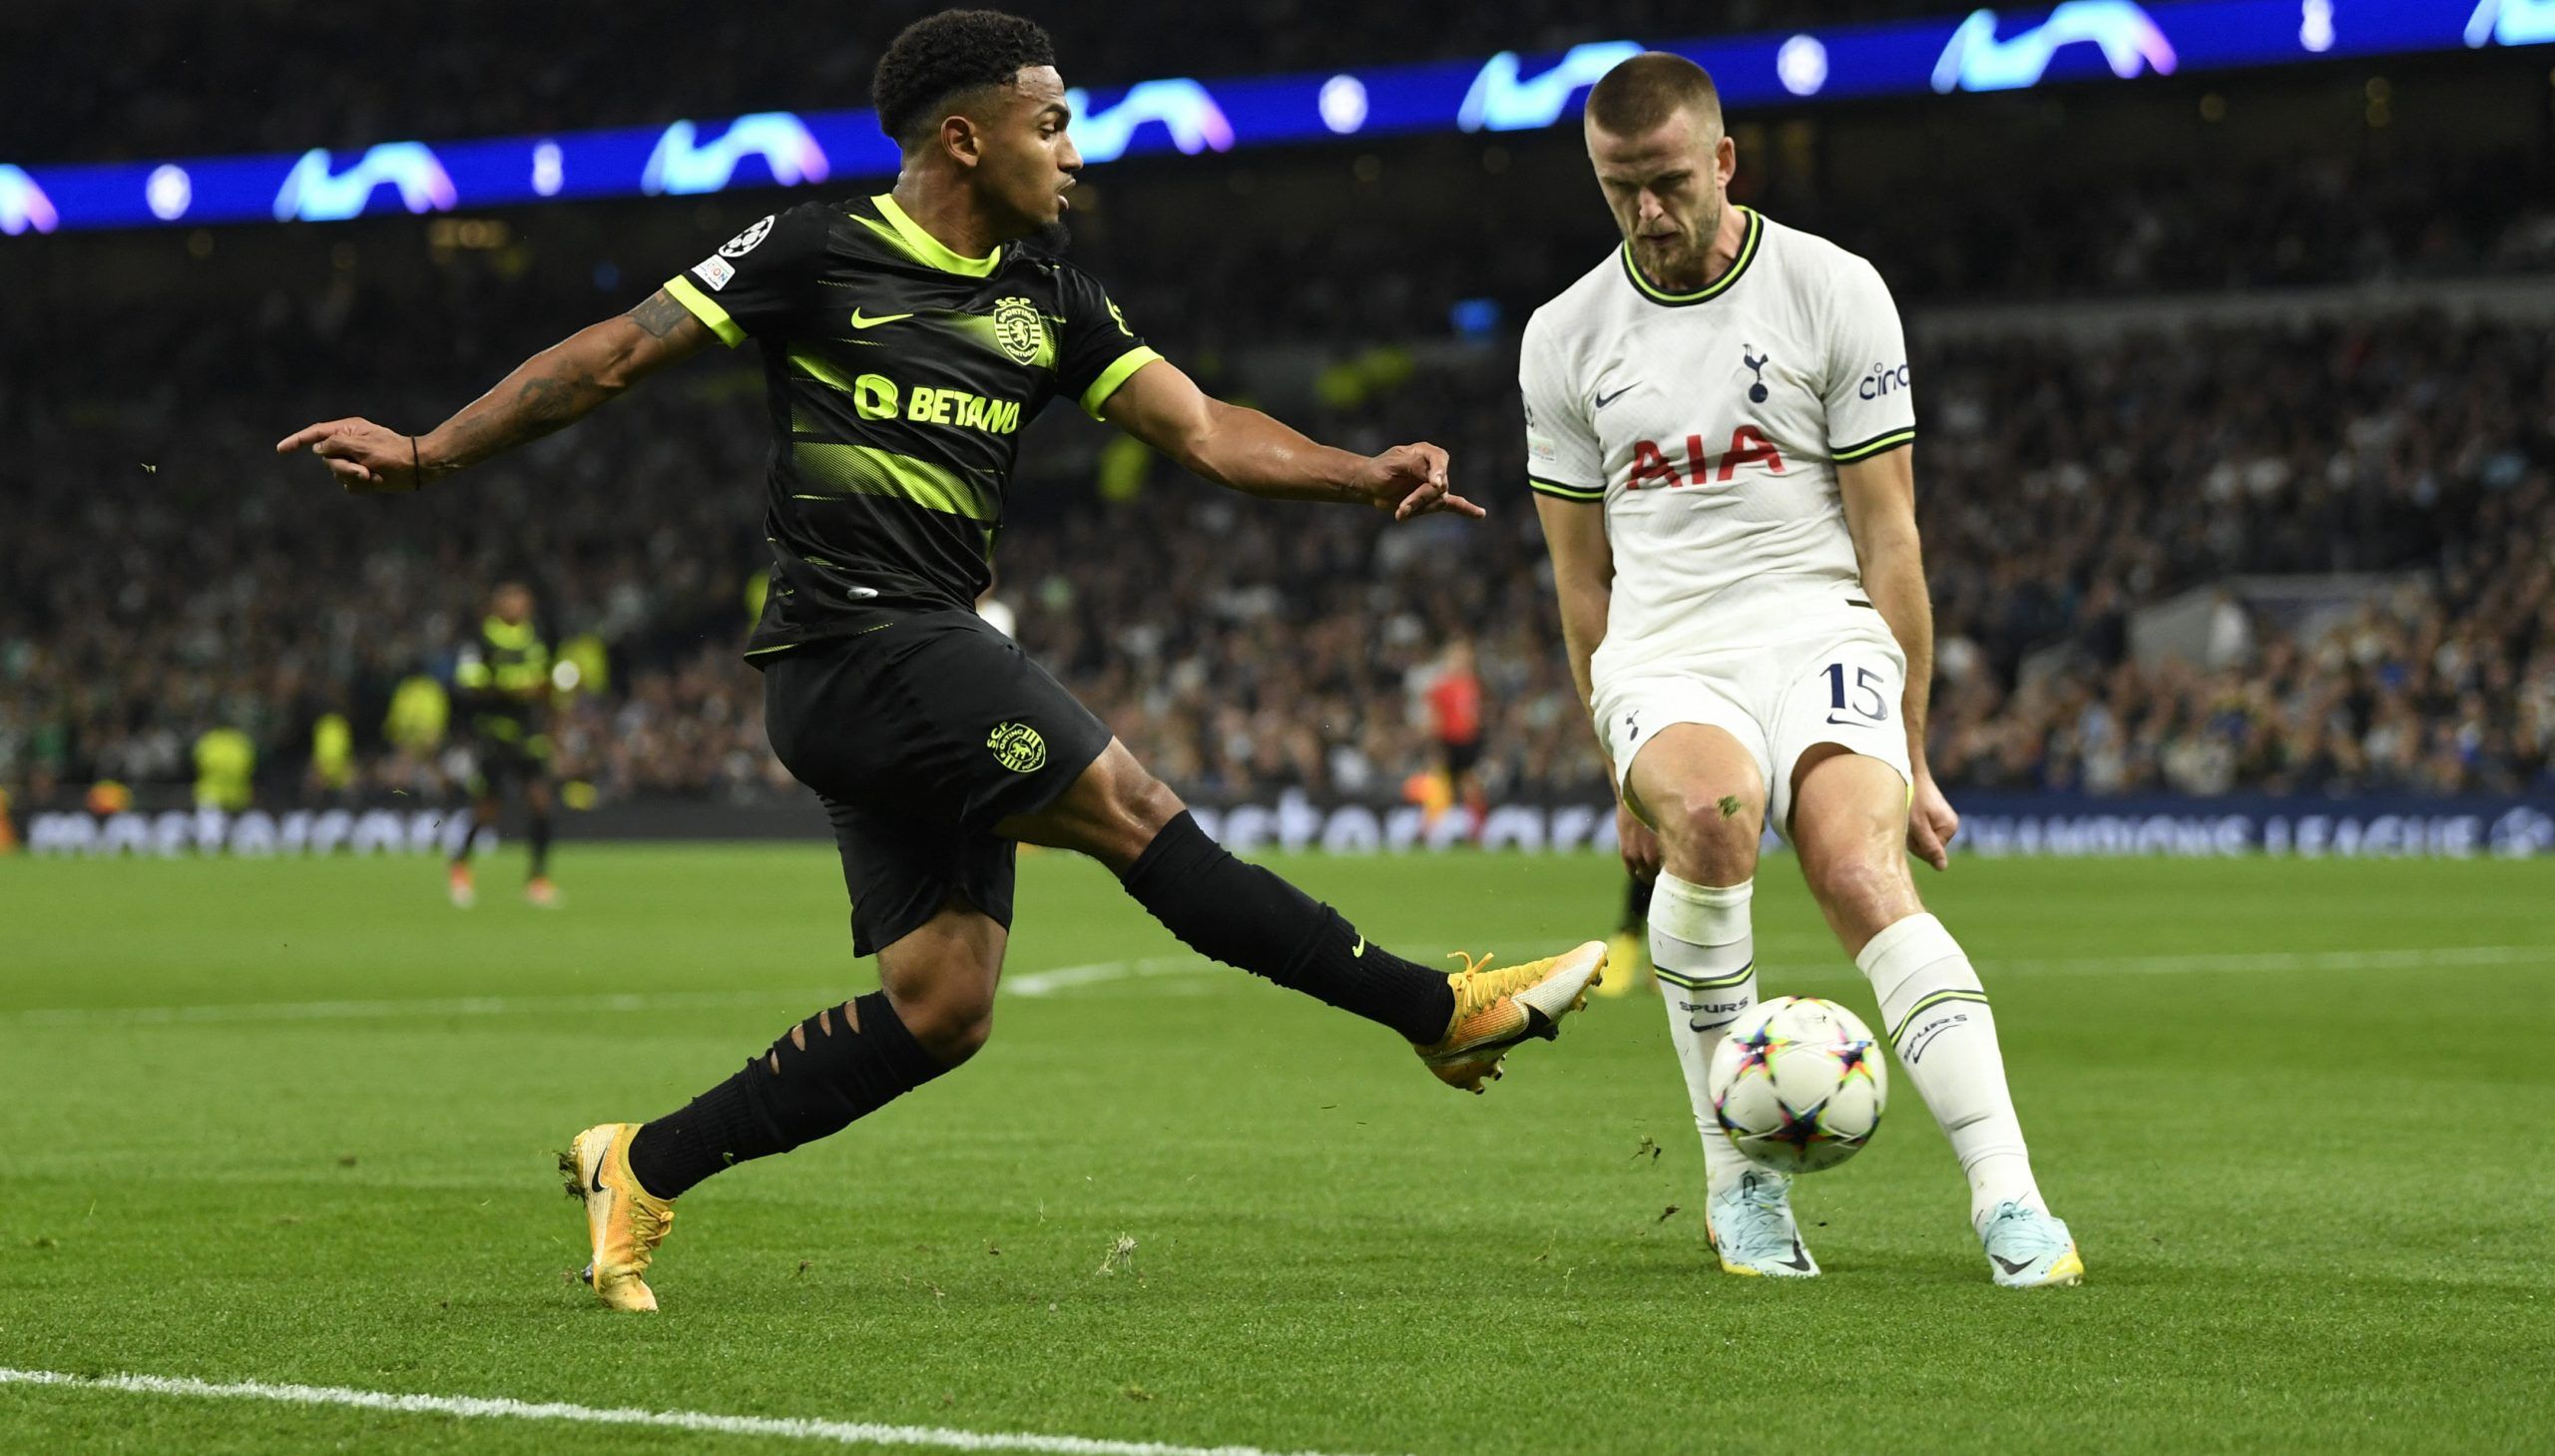 Soccer Football - Champions League - Group D - Tottenham Hotspur v Sporting CP - Tottenham Hotspur Stadium, London, Britain - October 26, 2022 Sporting CP's Marcus Edwards in action with Tottenham Hotspur's Eric Dier REUTERS/Tony Obrien